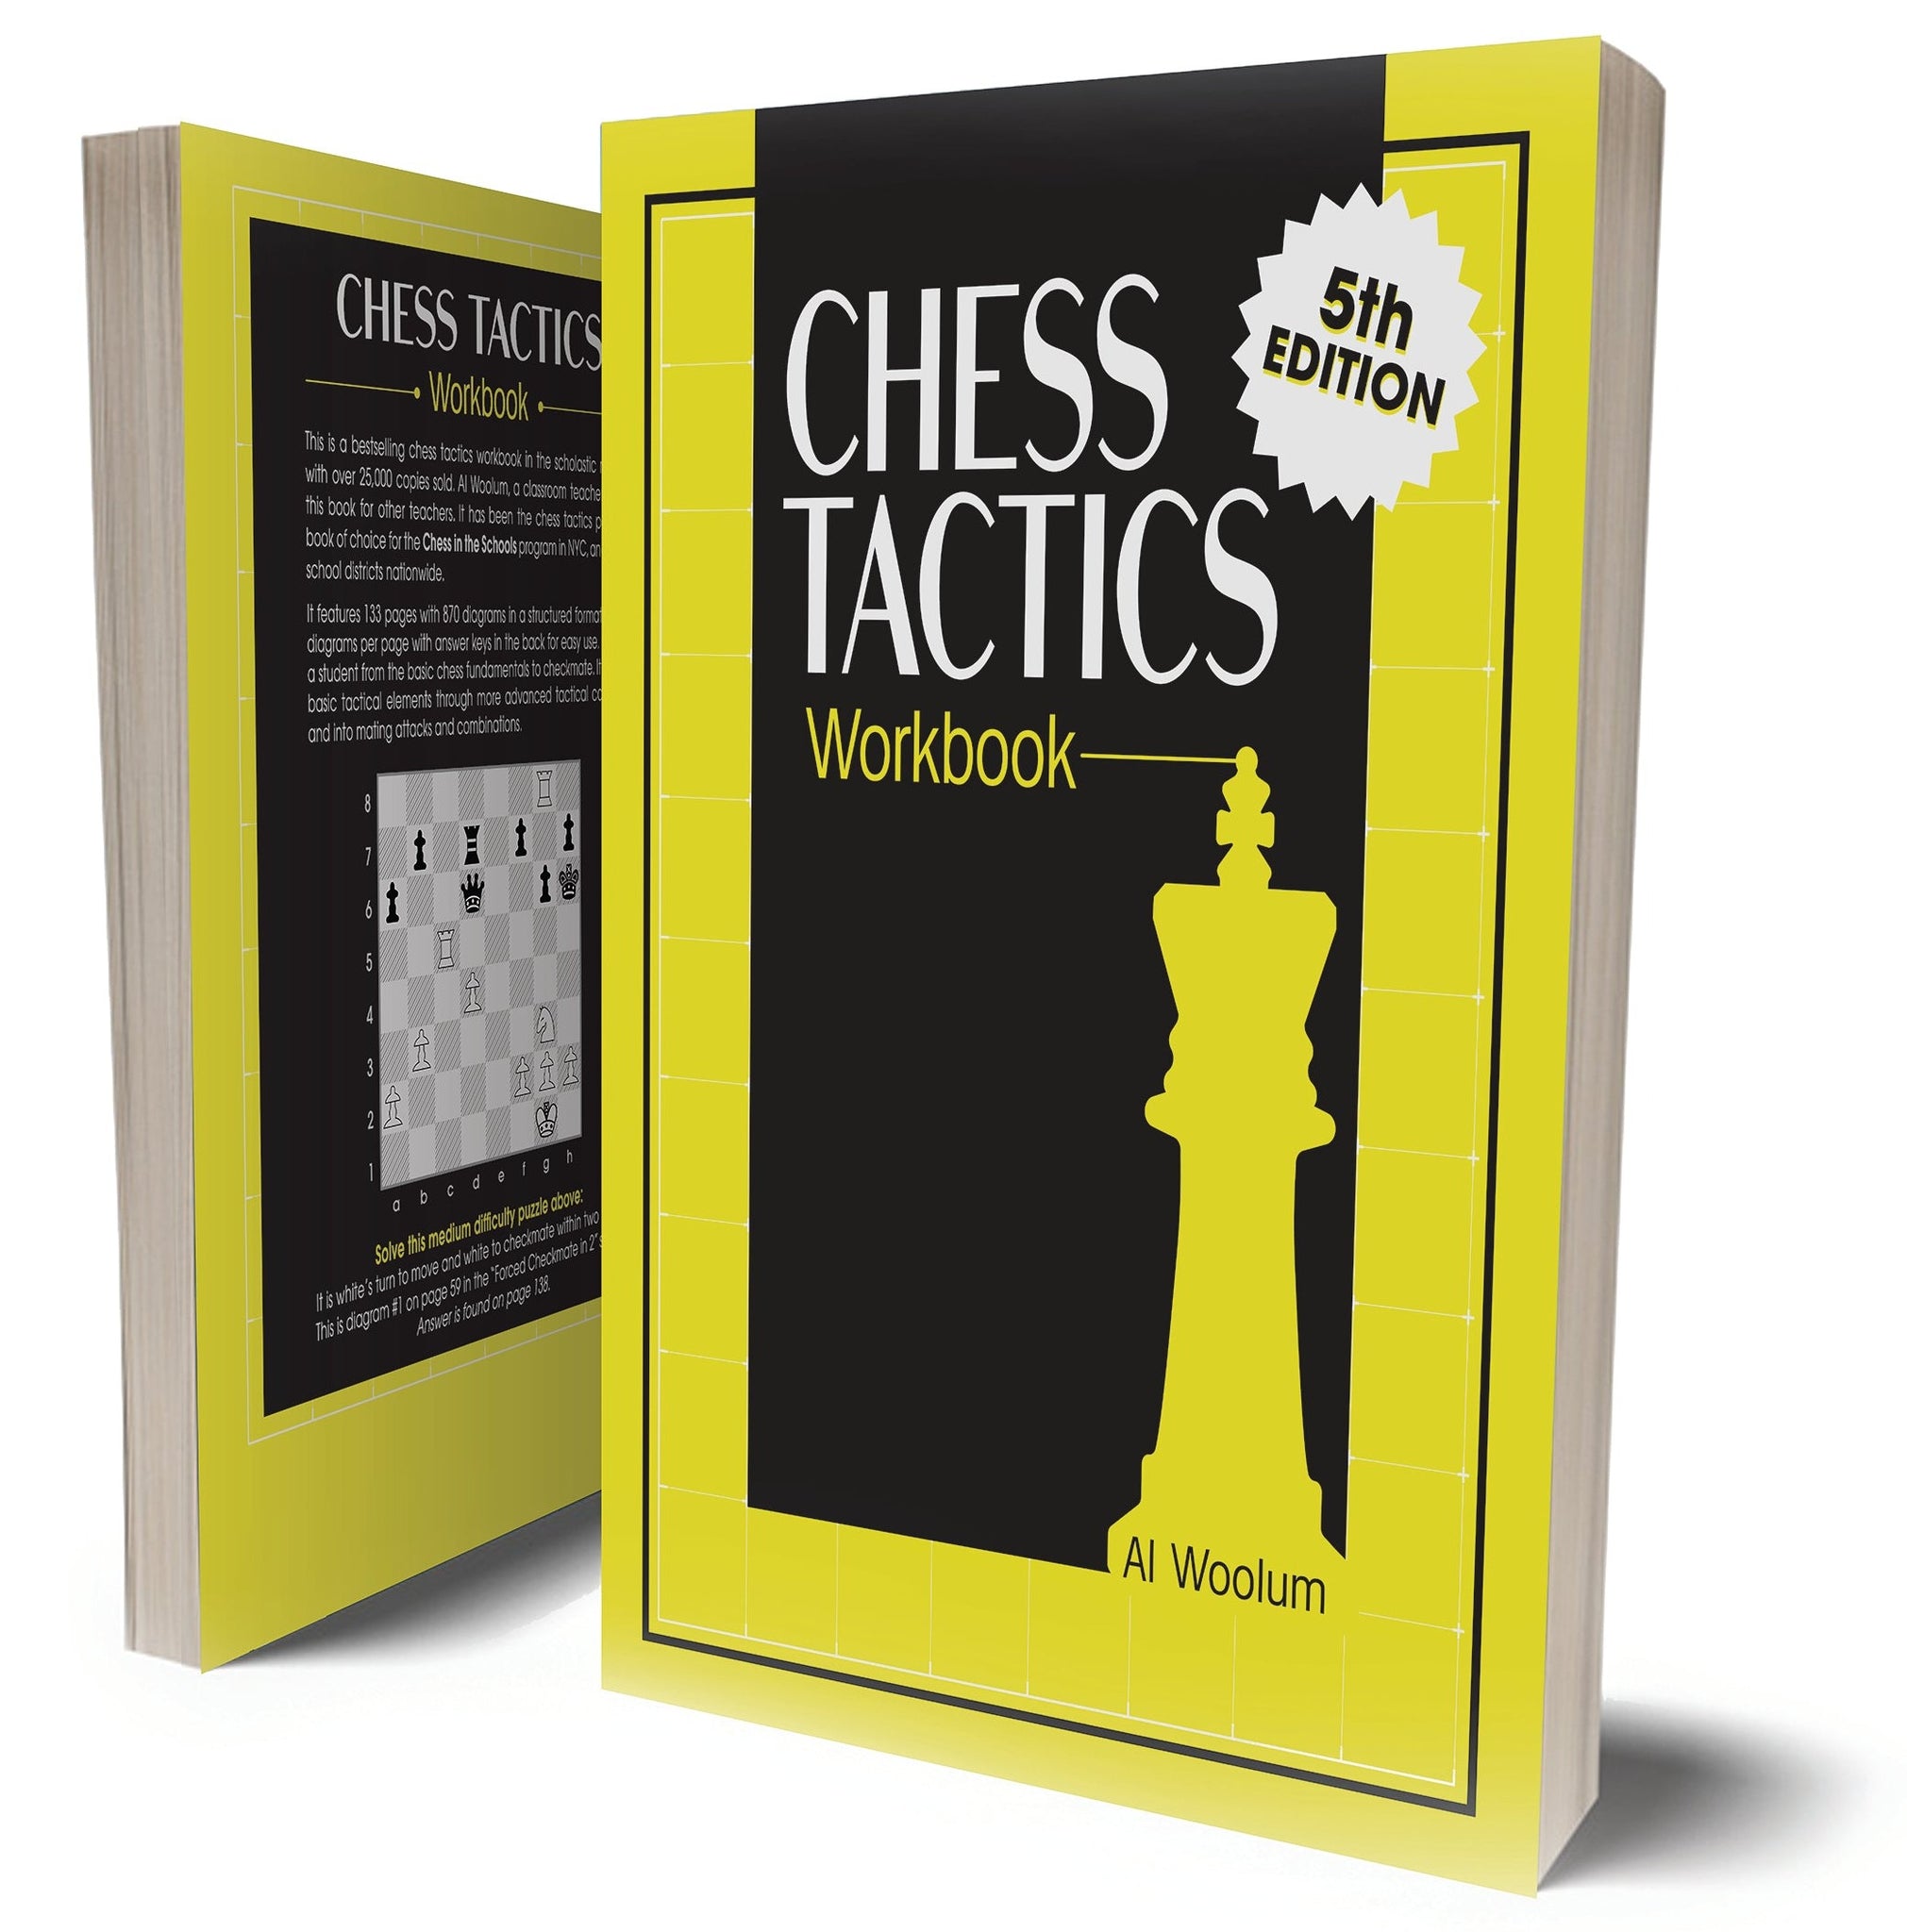 The Chess Tactics Workbook by Al Woolum – 5th Edition